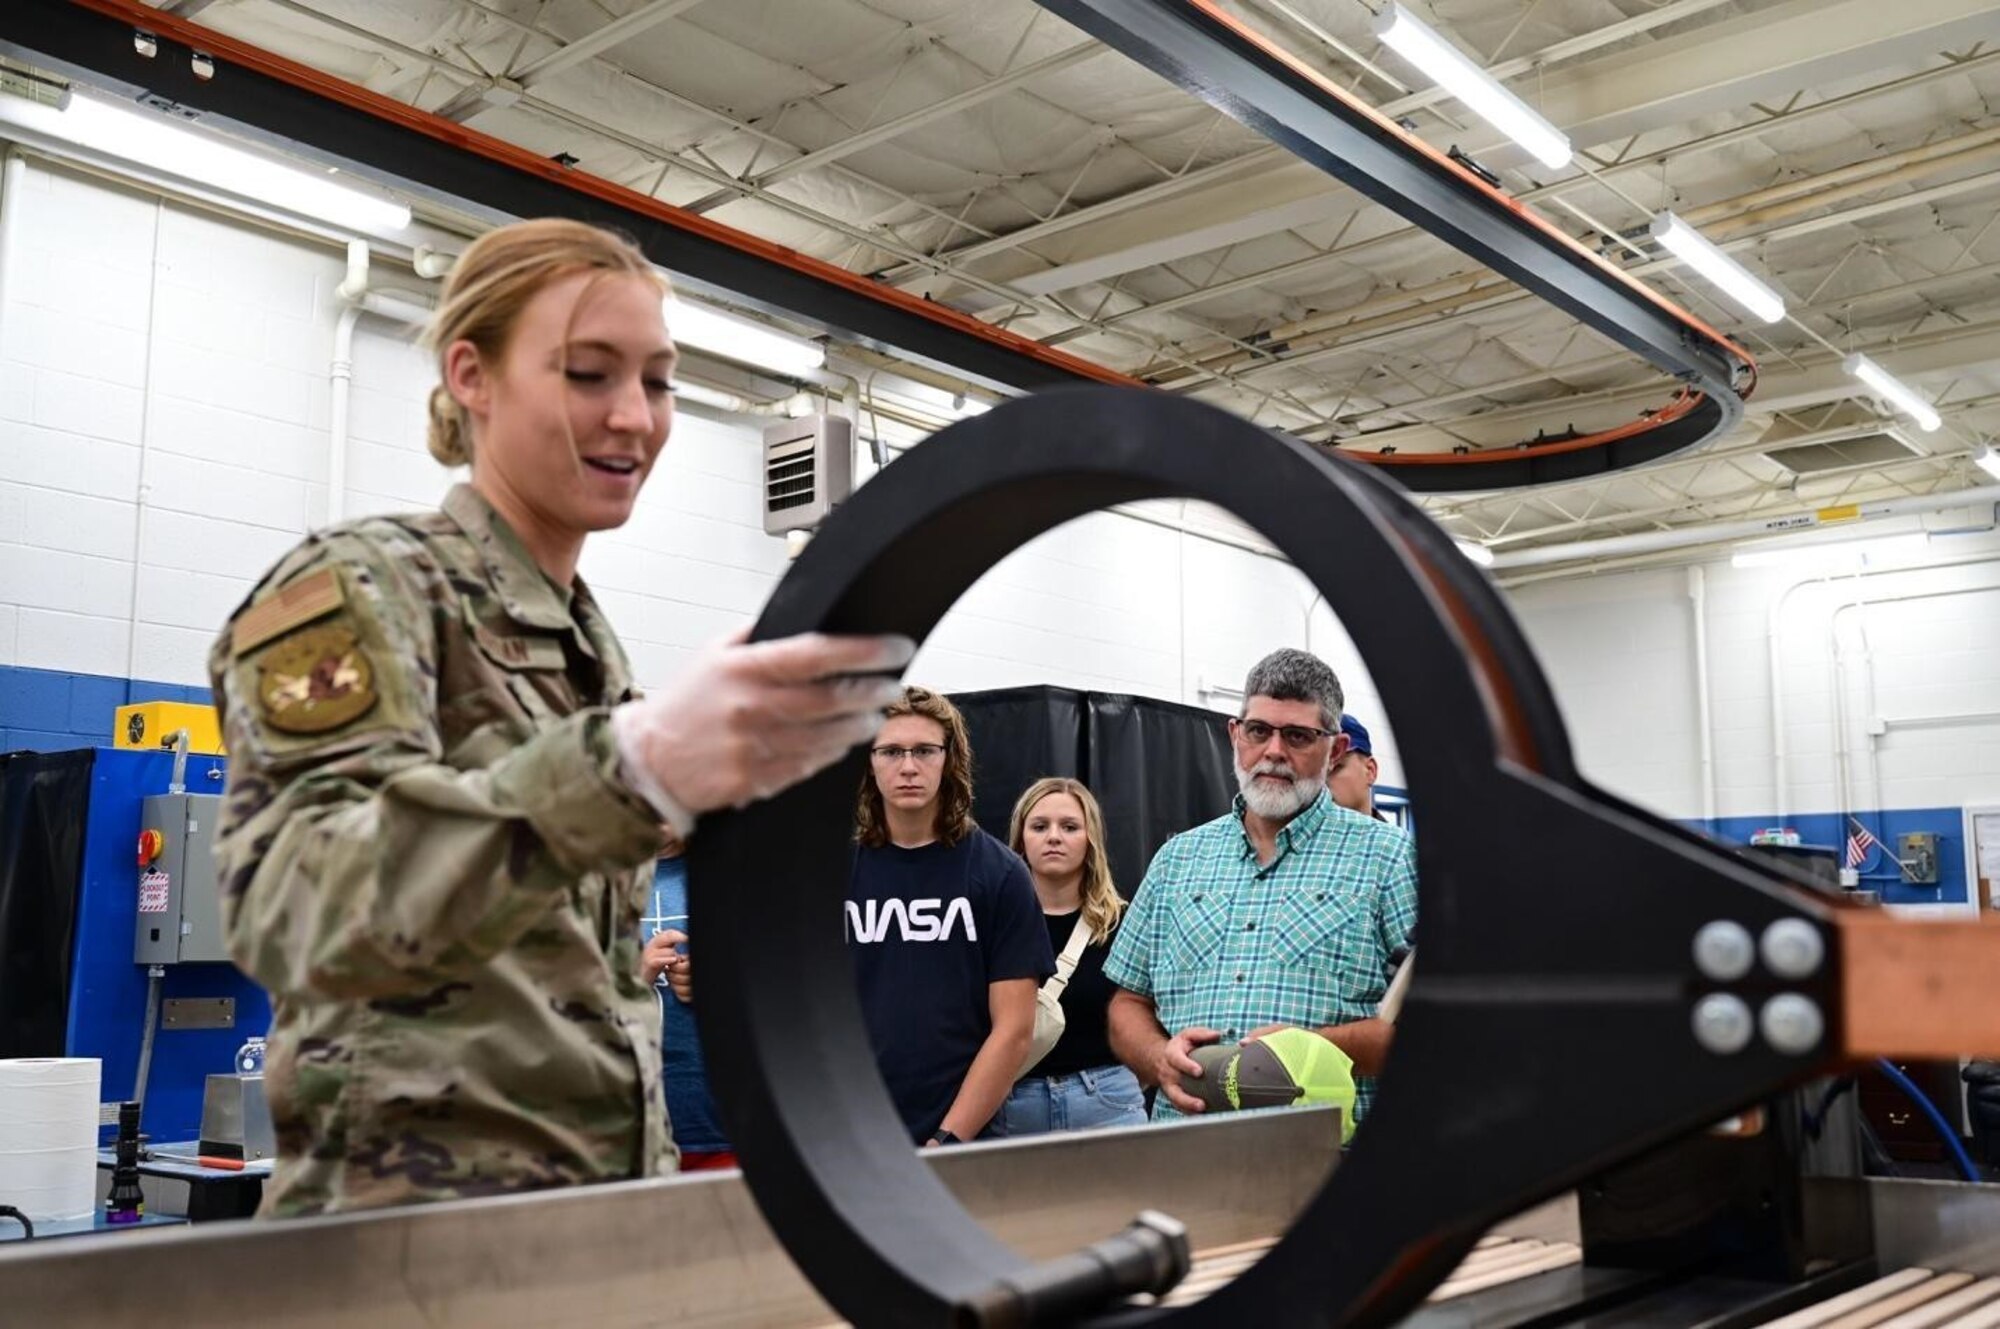 Marvin Pepper and his family are given a tour of the Non-Destructive Inspection laboratory by Senior Airman Faith Jordan, an 28th Maintenance Squadron Fabrication Flight NDI technician, at Ellsworth Air Force Base, S.D., July 13, 2022.